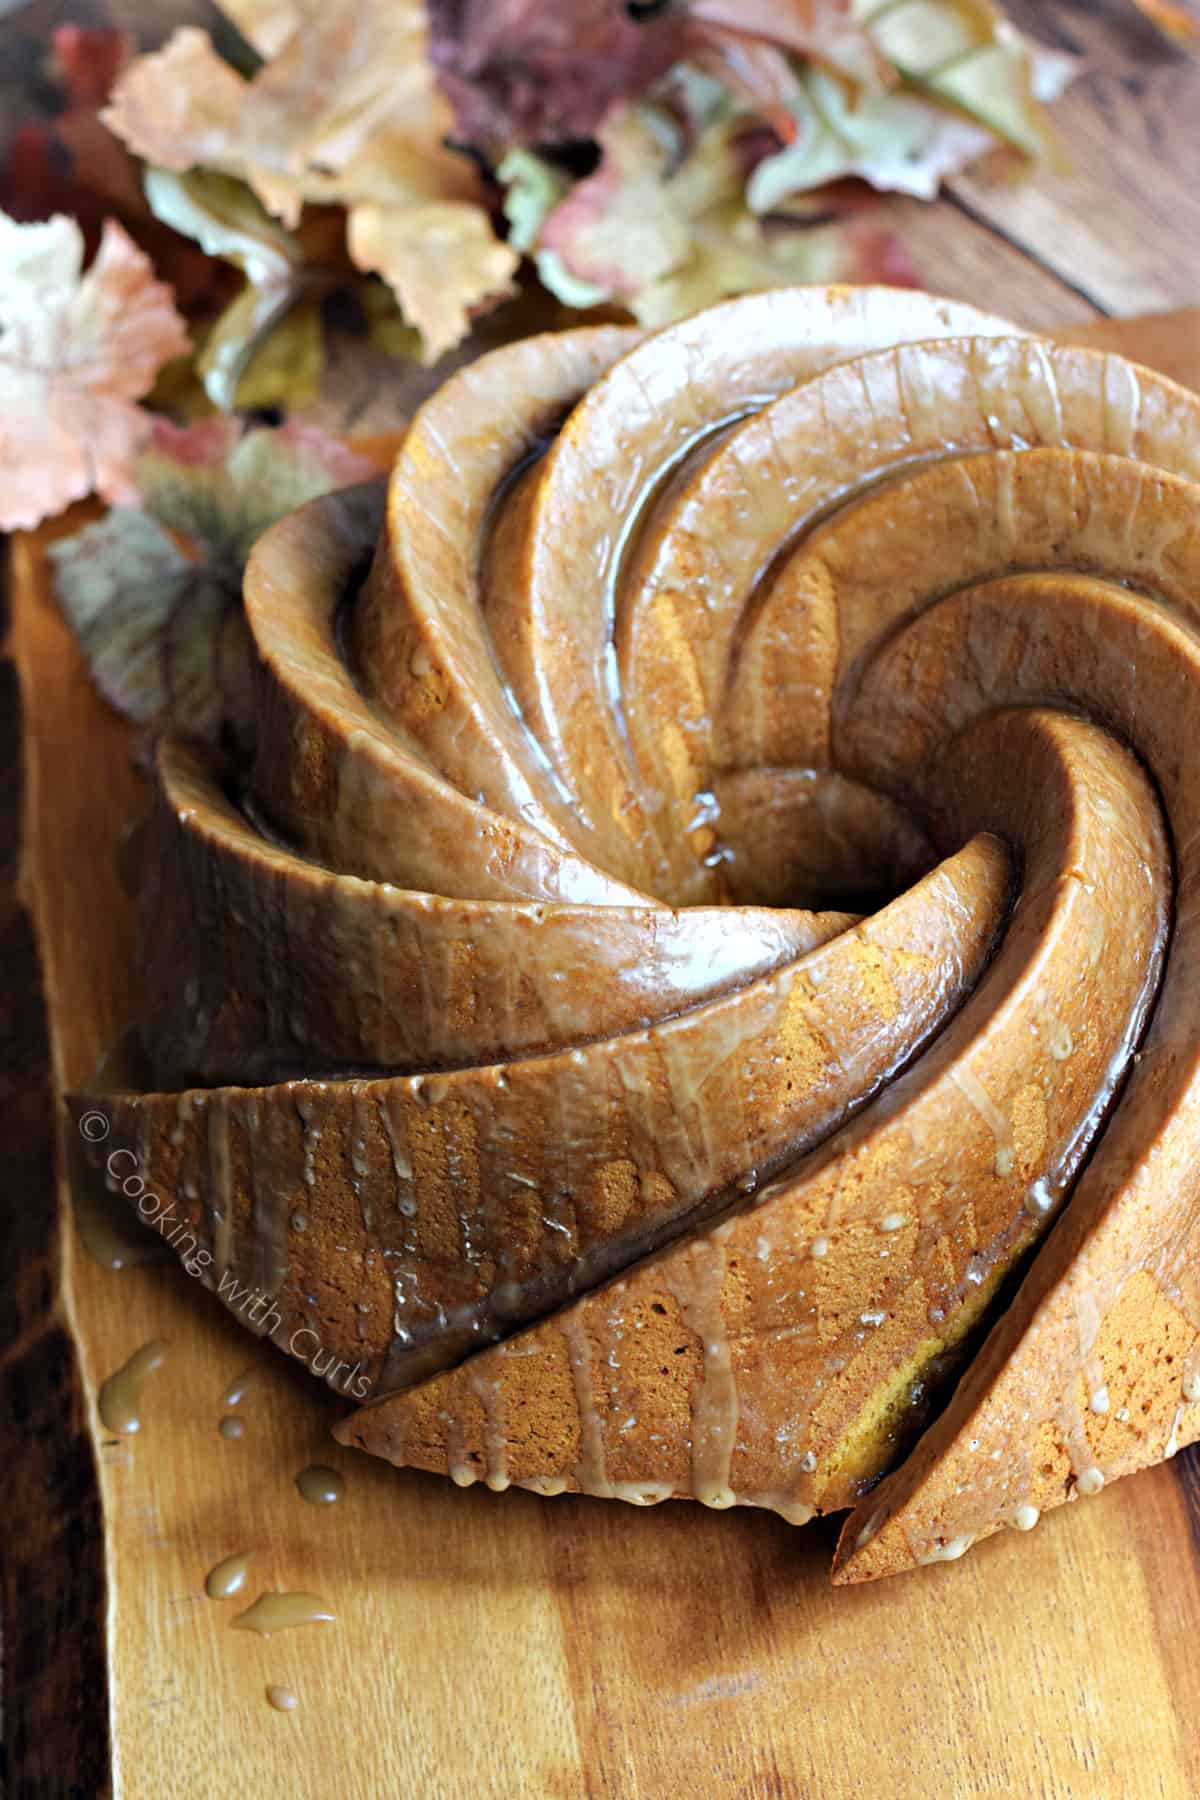 A swirl patterned bundt cake with glaze dripping down the sides sitting on a wood serving board.